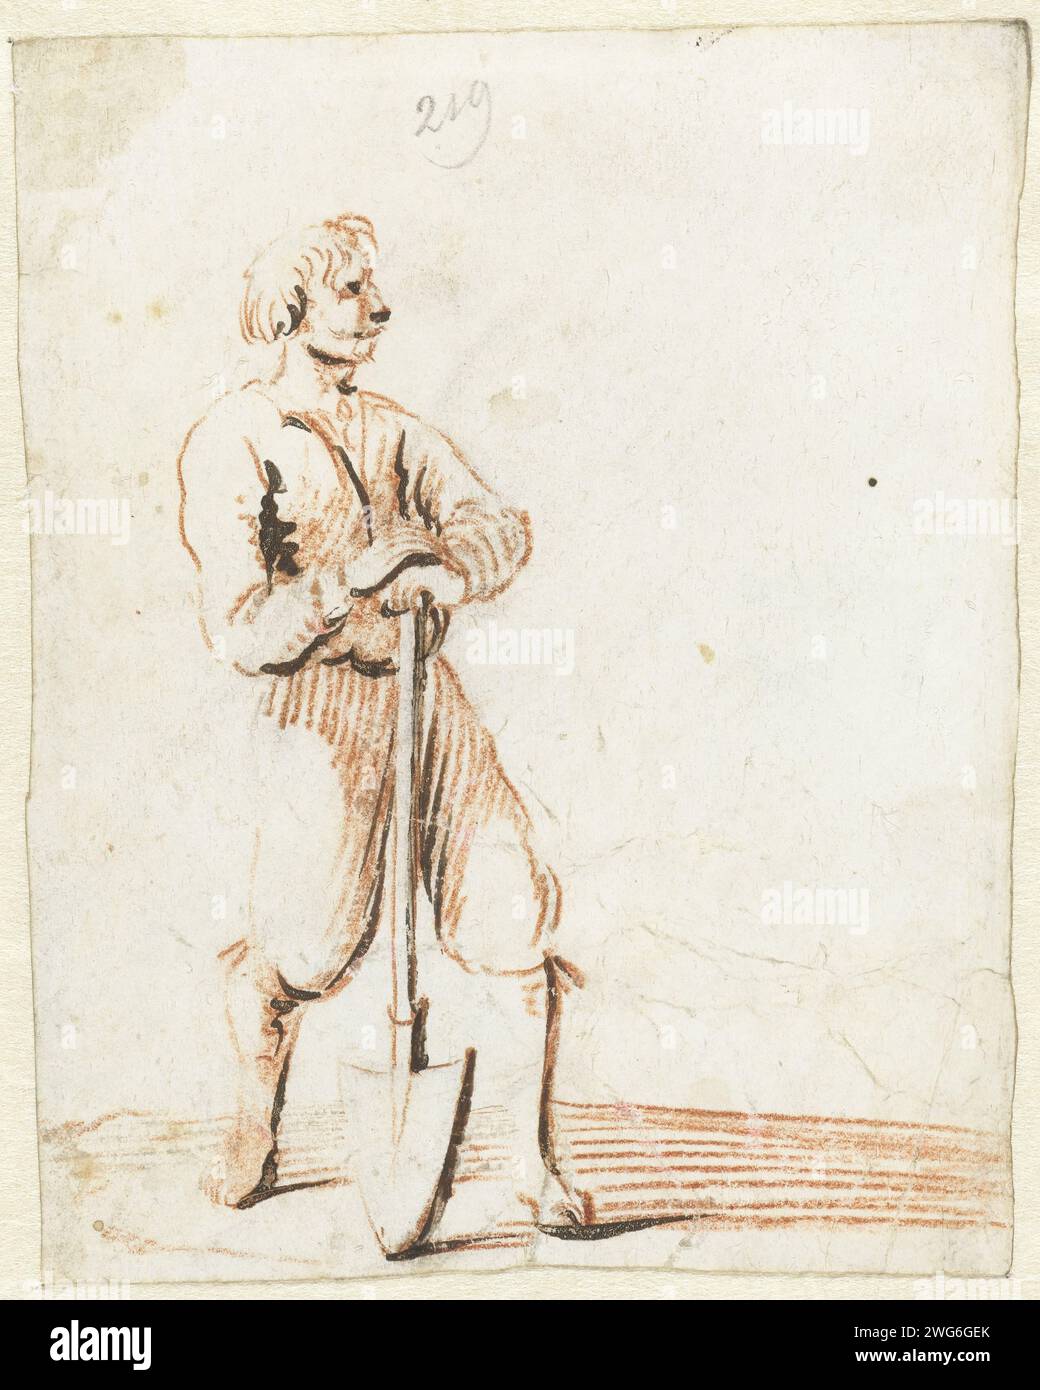 Man leaning on a scoop, 1649 drawing  Zwolle parchment (animal material). ink. chalk. deck paint. gouache (paint) painting Stock Photo